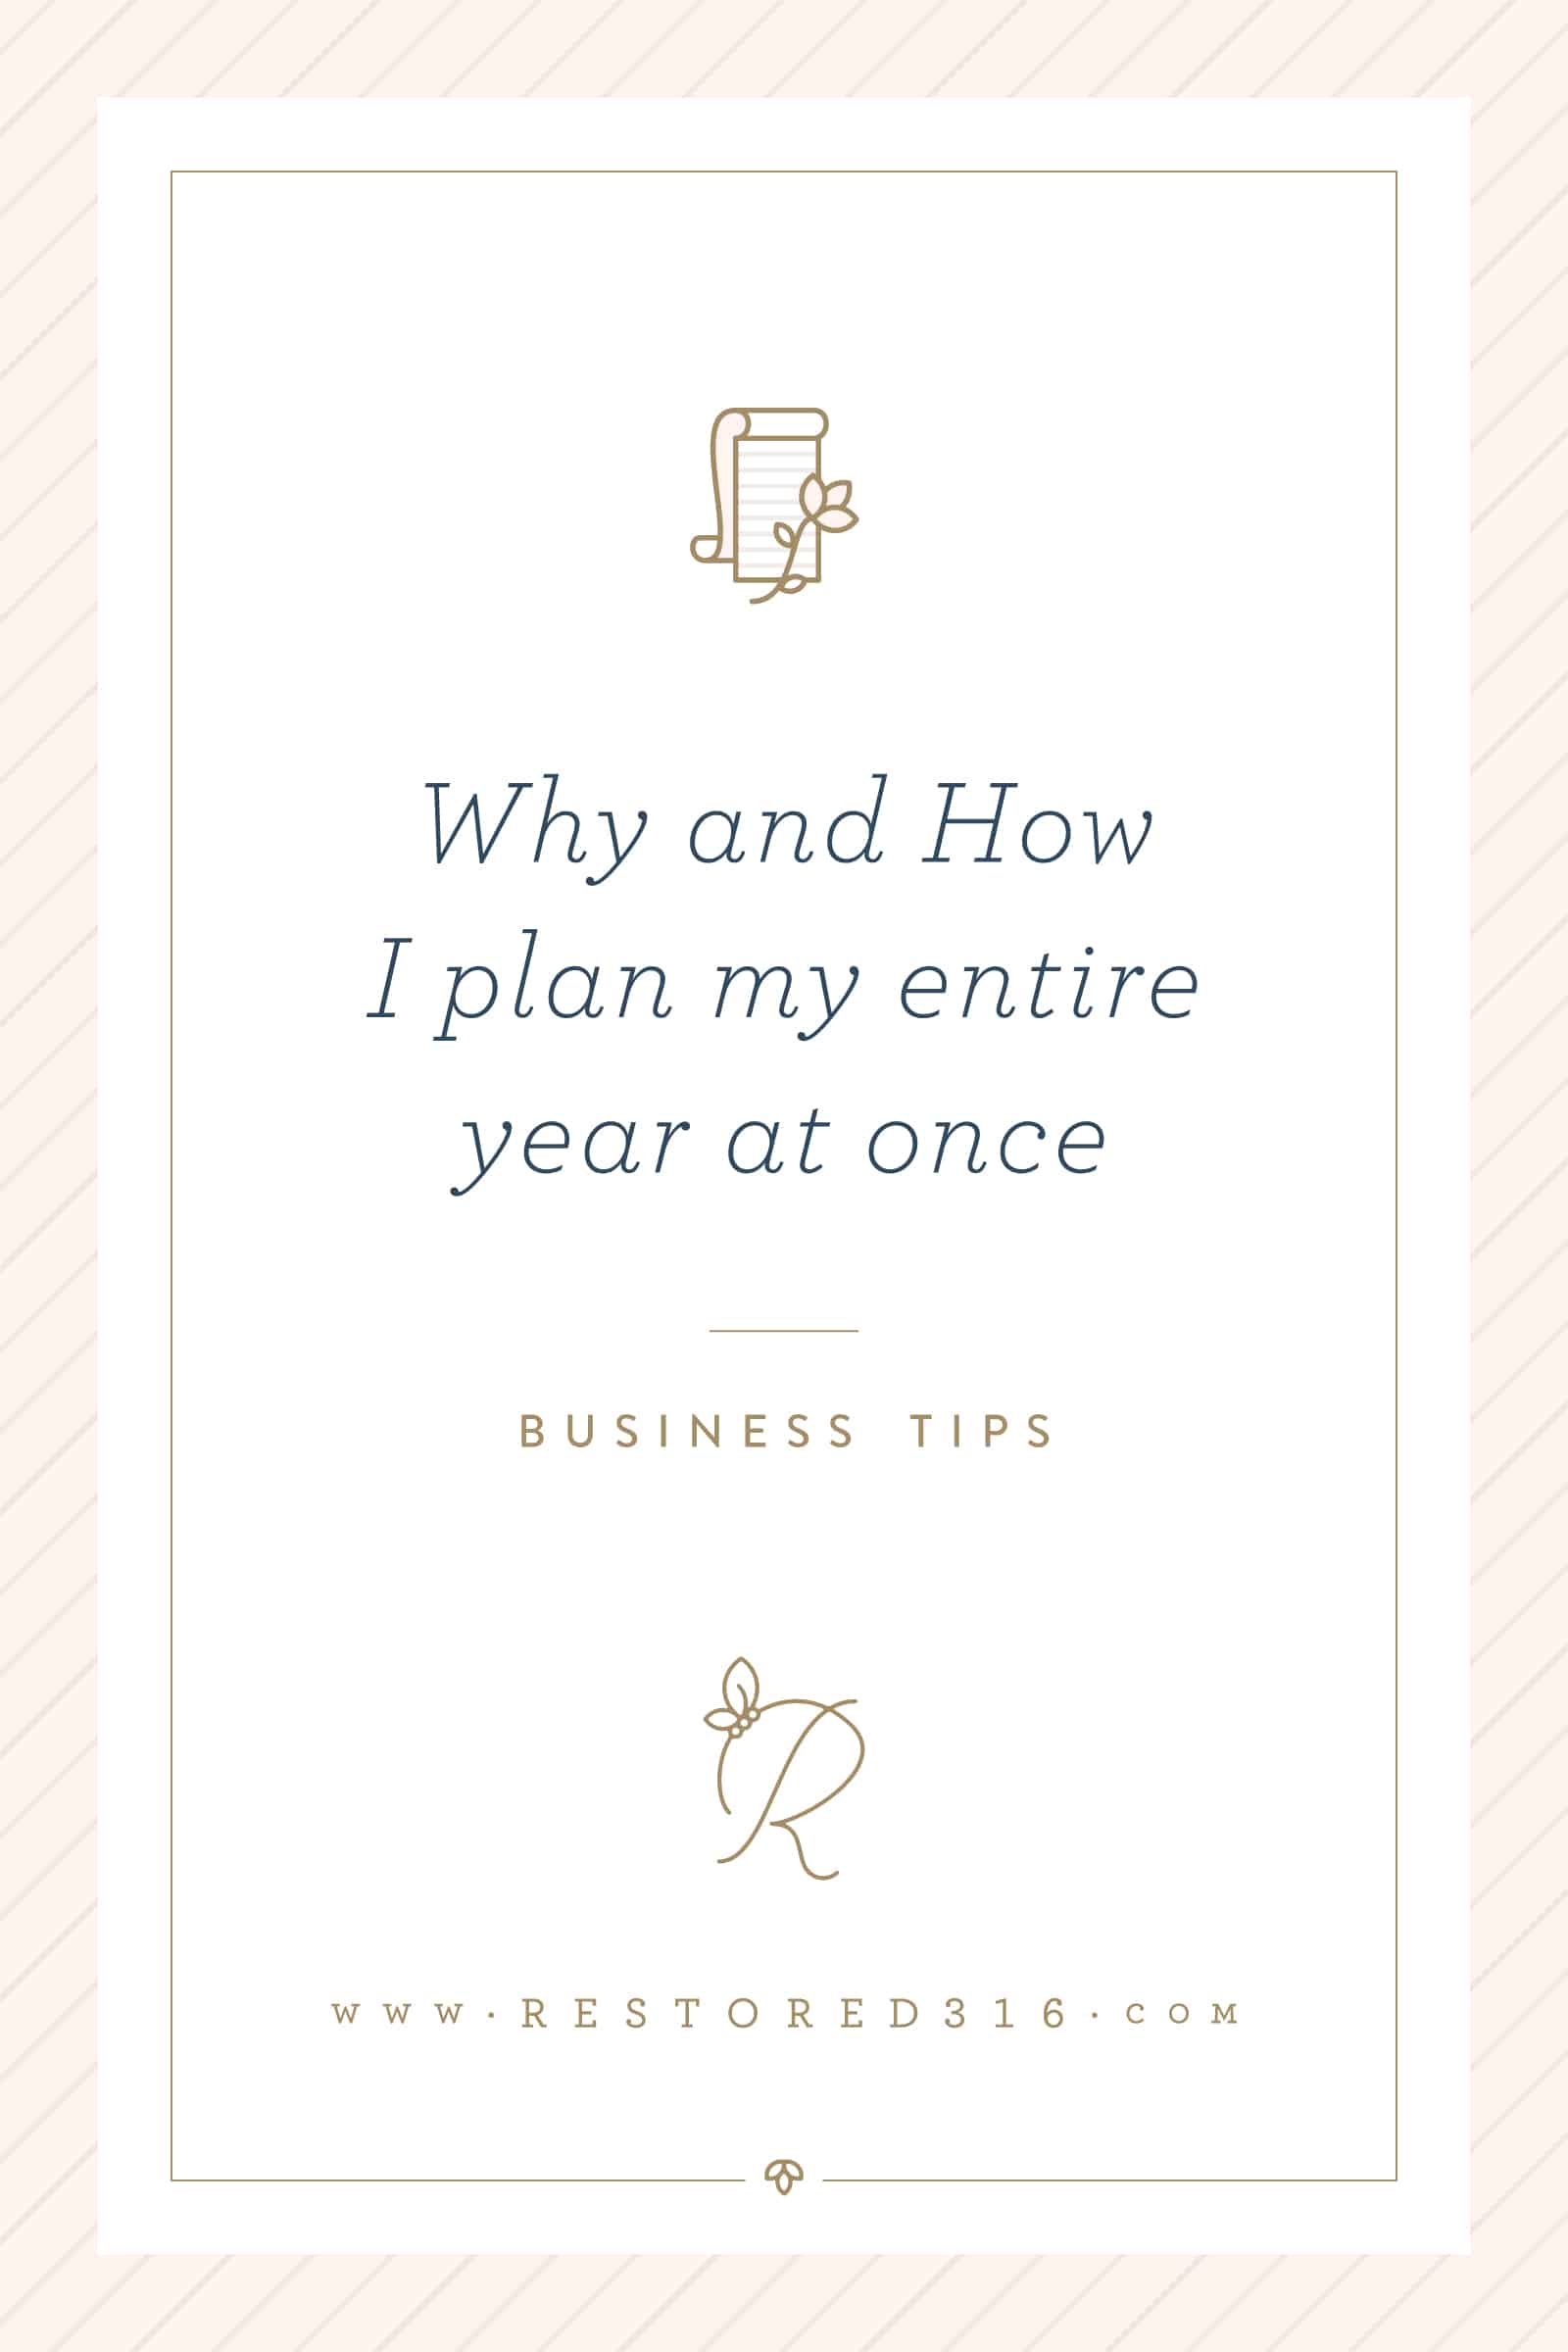 Why and How I plan my entire year at once